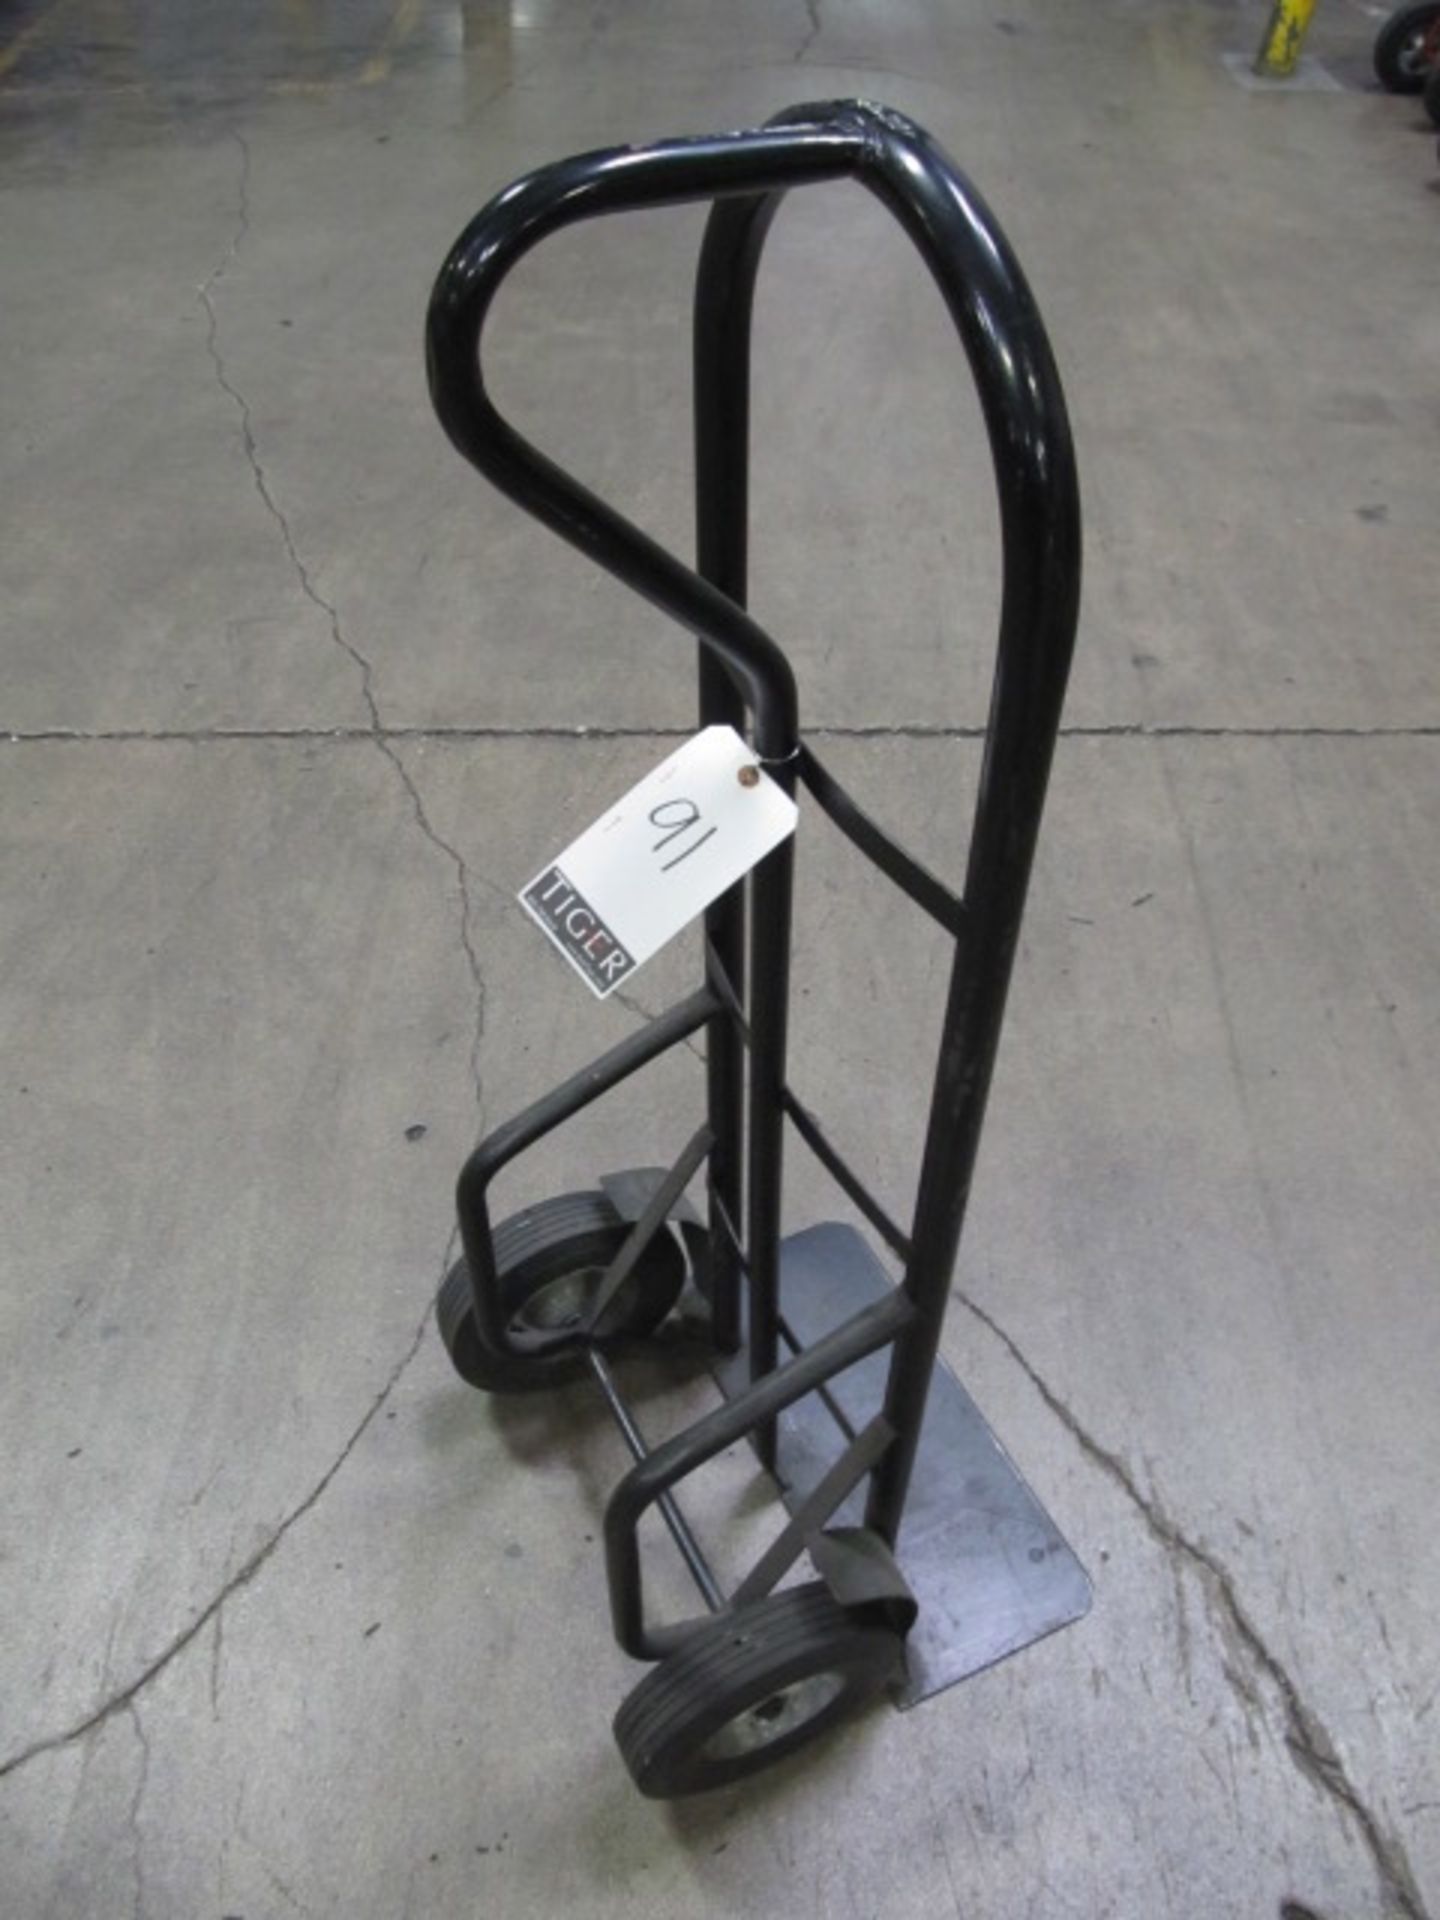 Heavy Duty Hand Truck With Solid Wheels. Asset Location: West Warehouse, Site Location: Mira Loma,